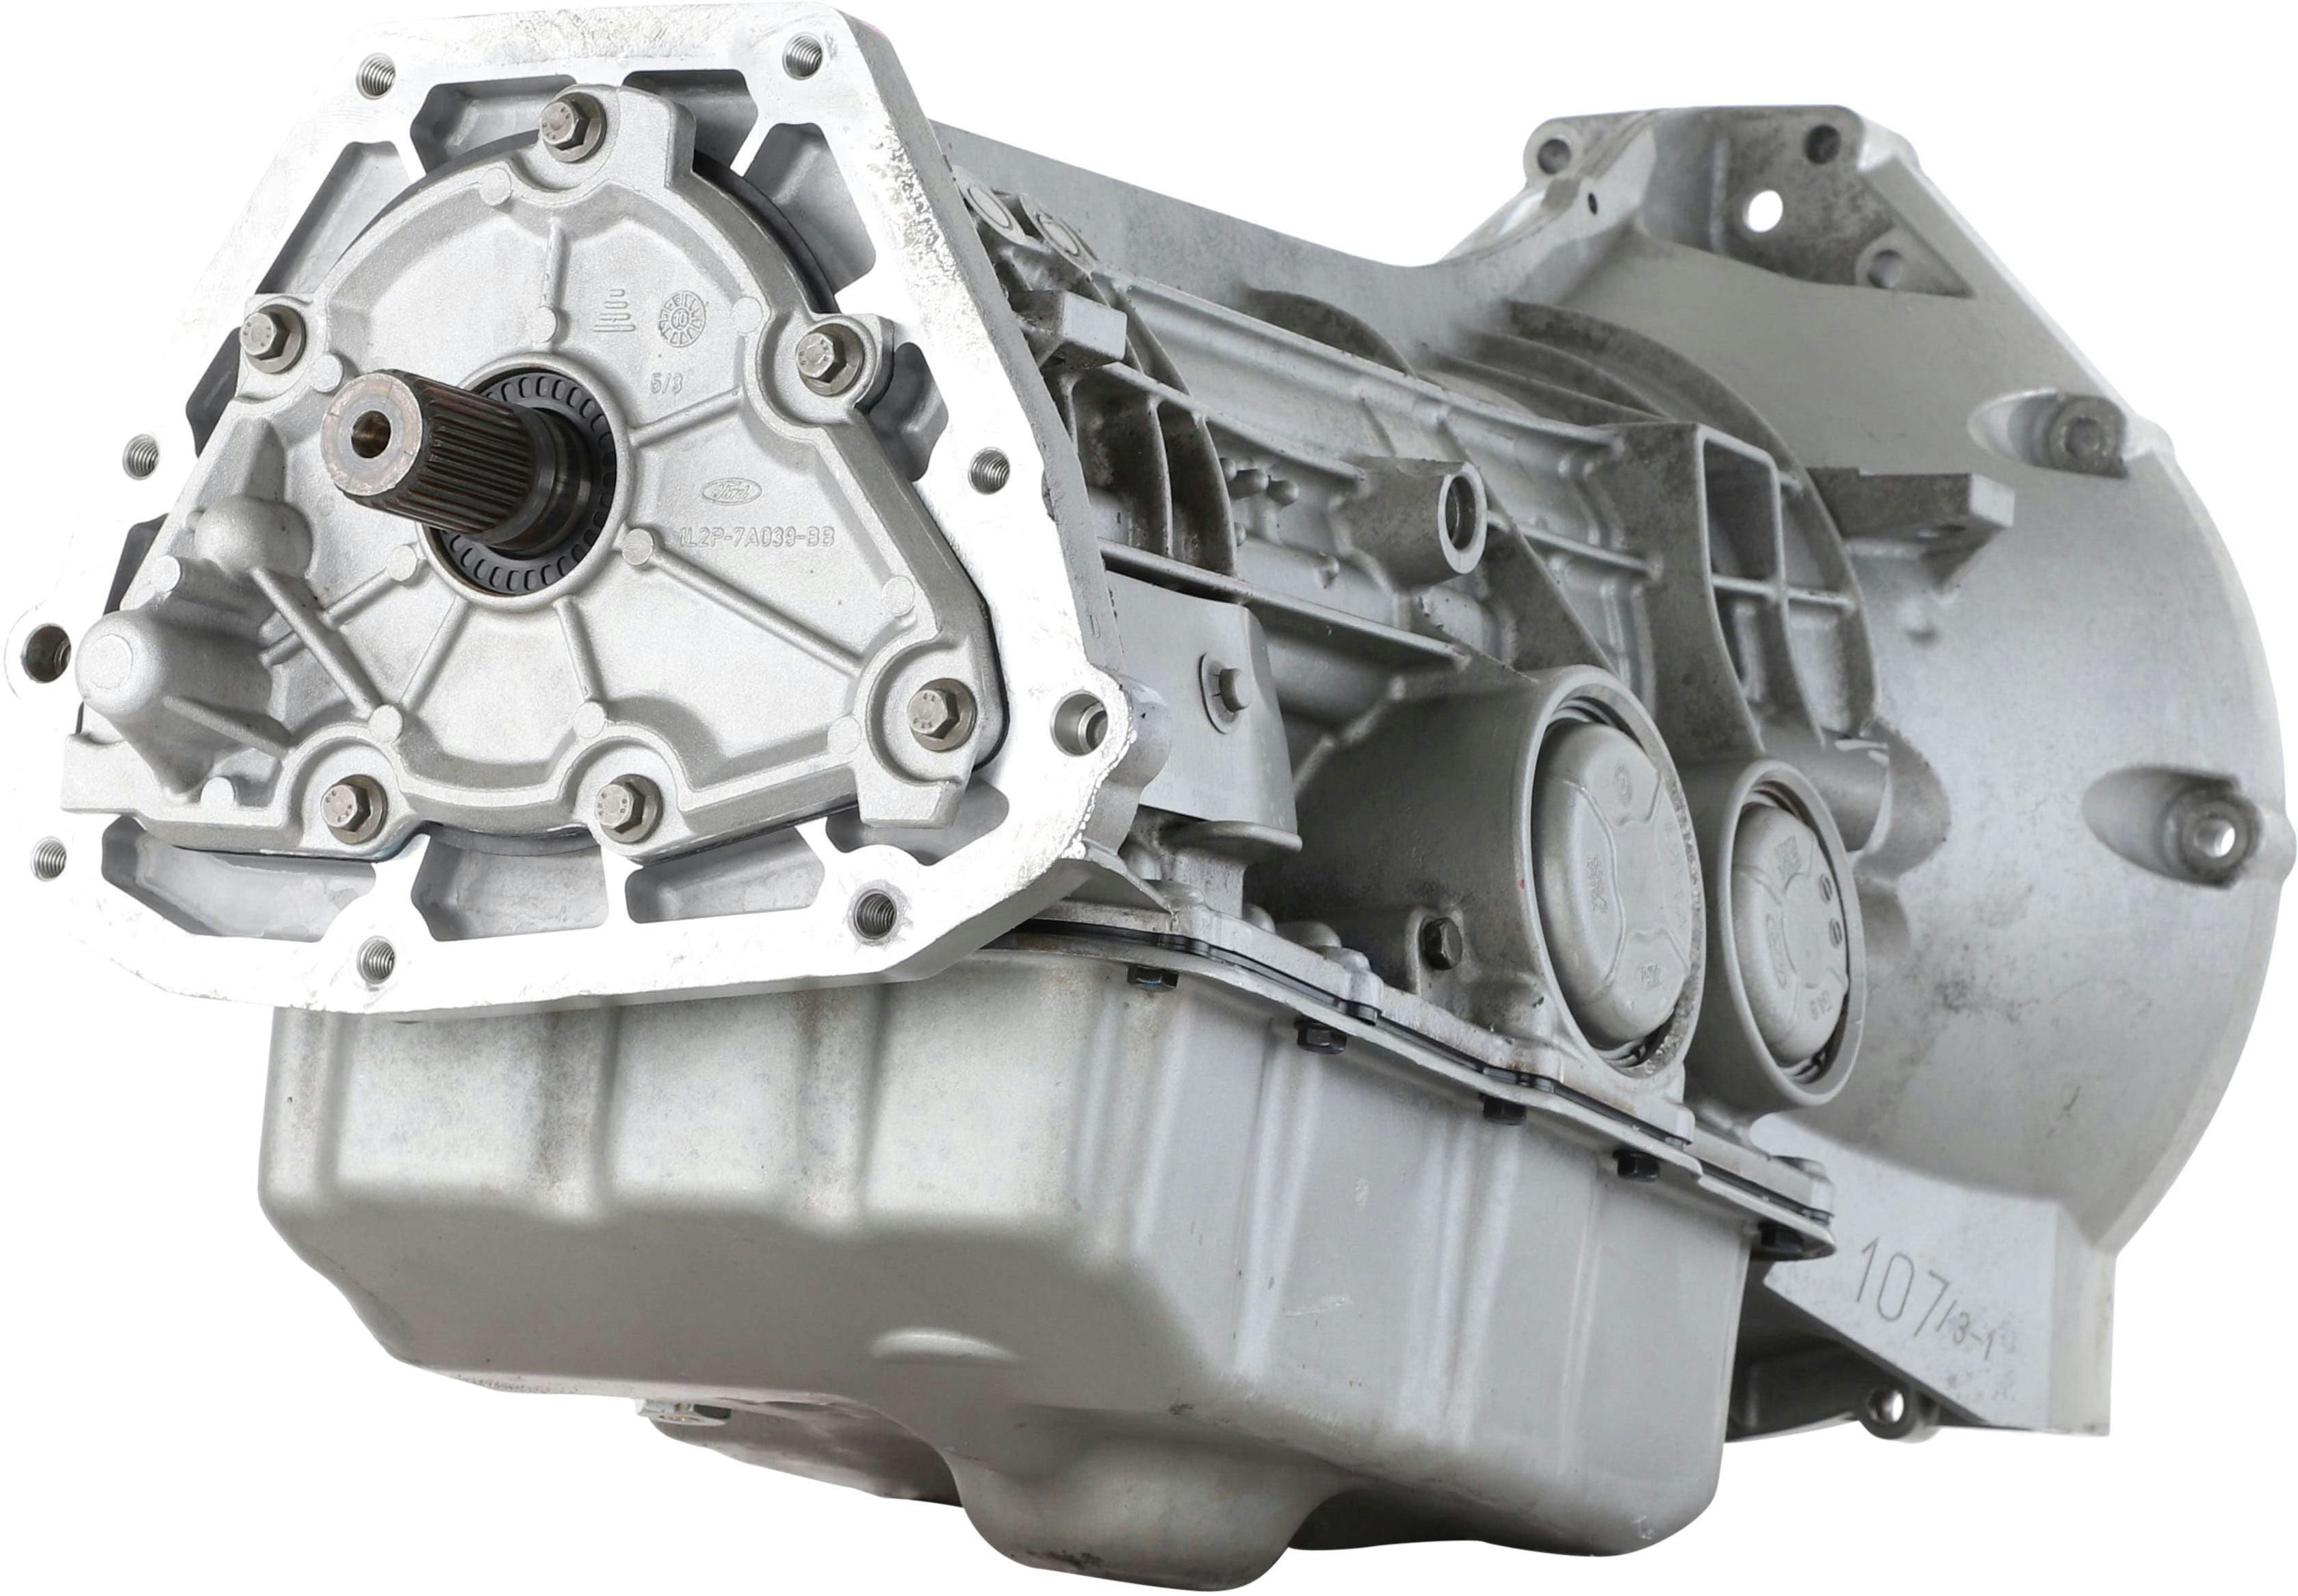 Automatic Transmission for 2009-2010 Ford Explorer/Explorer Sport Trac and Mercury Mountaineer 4WD with 4L V6 Engine